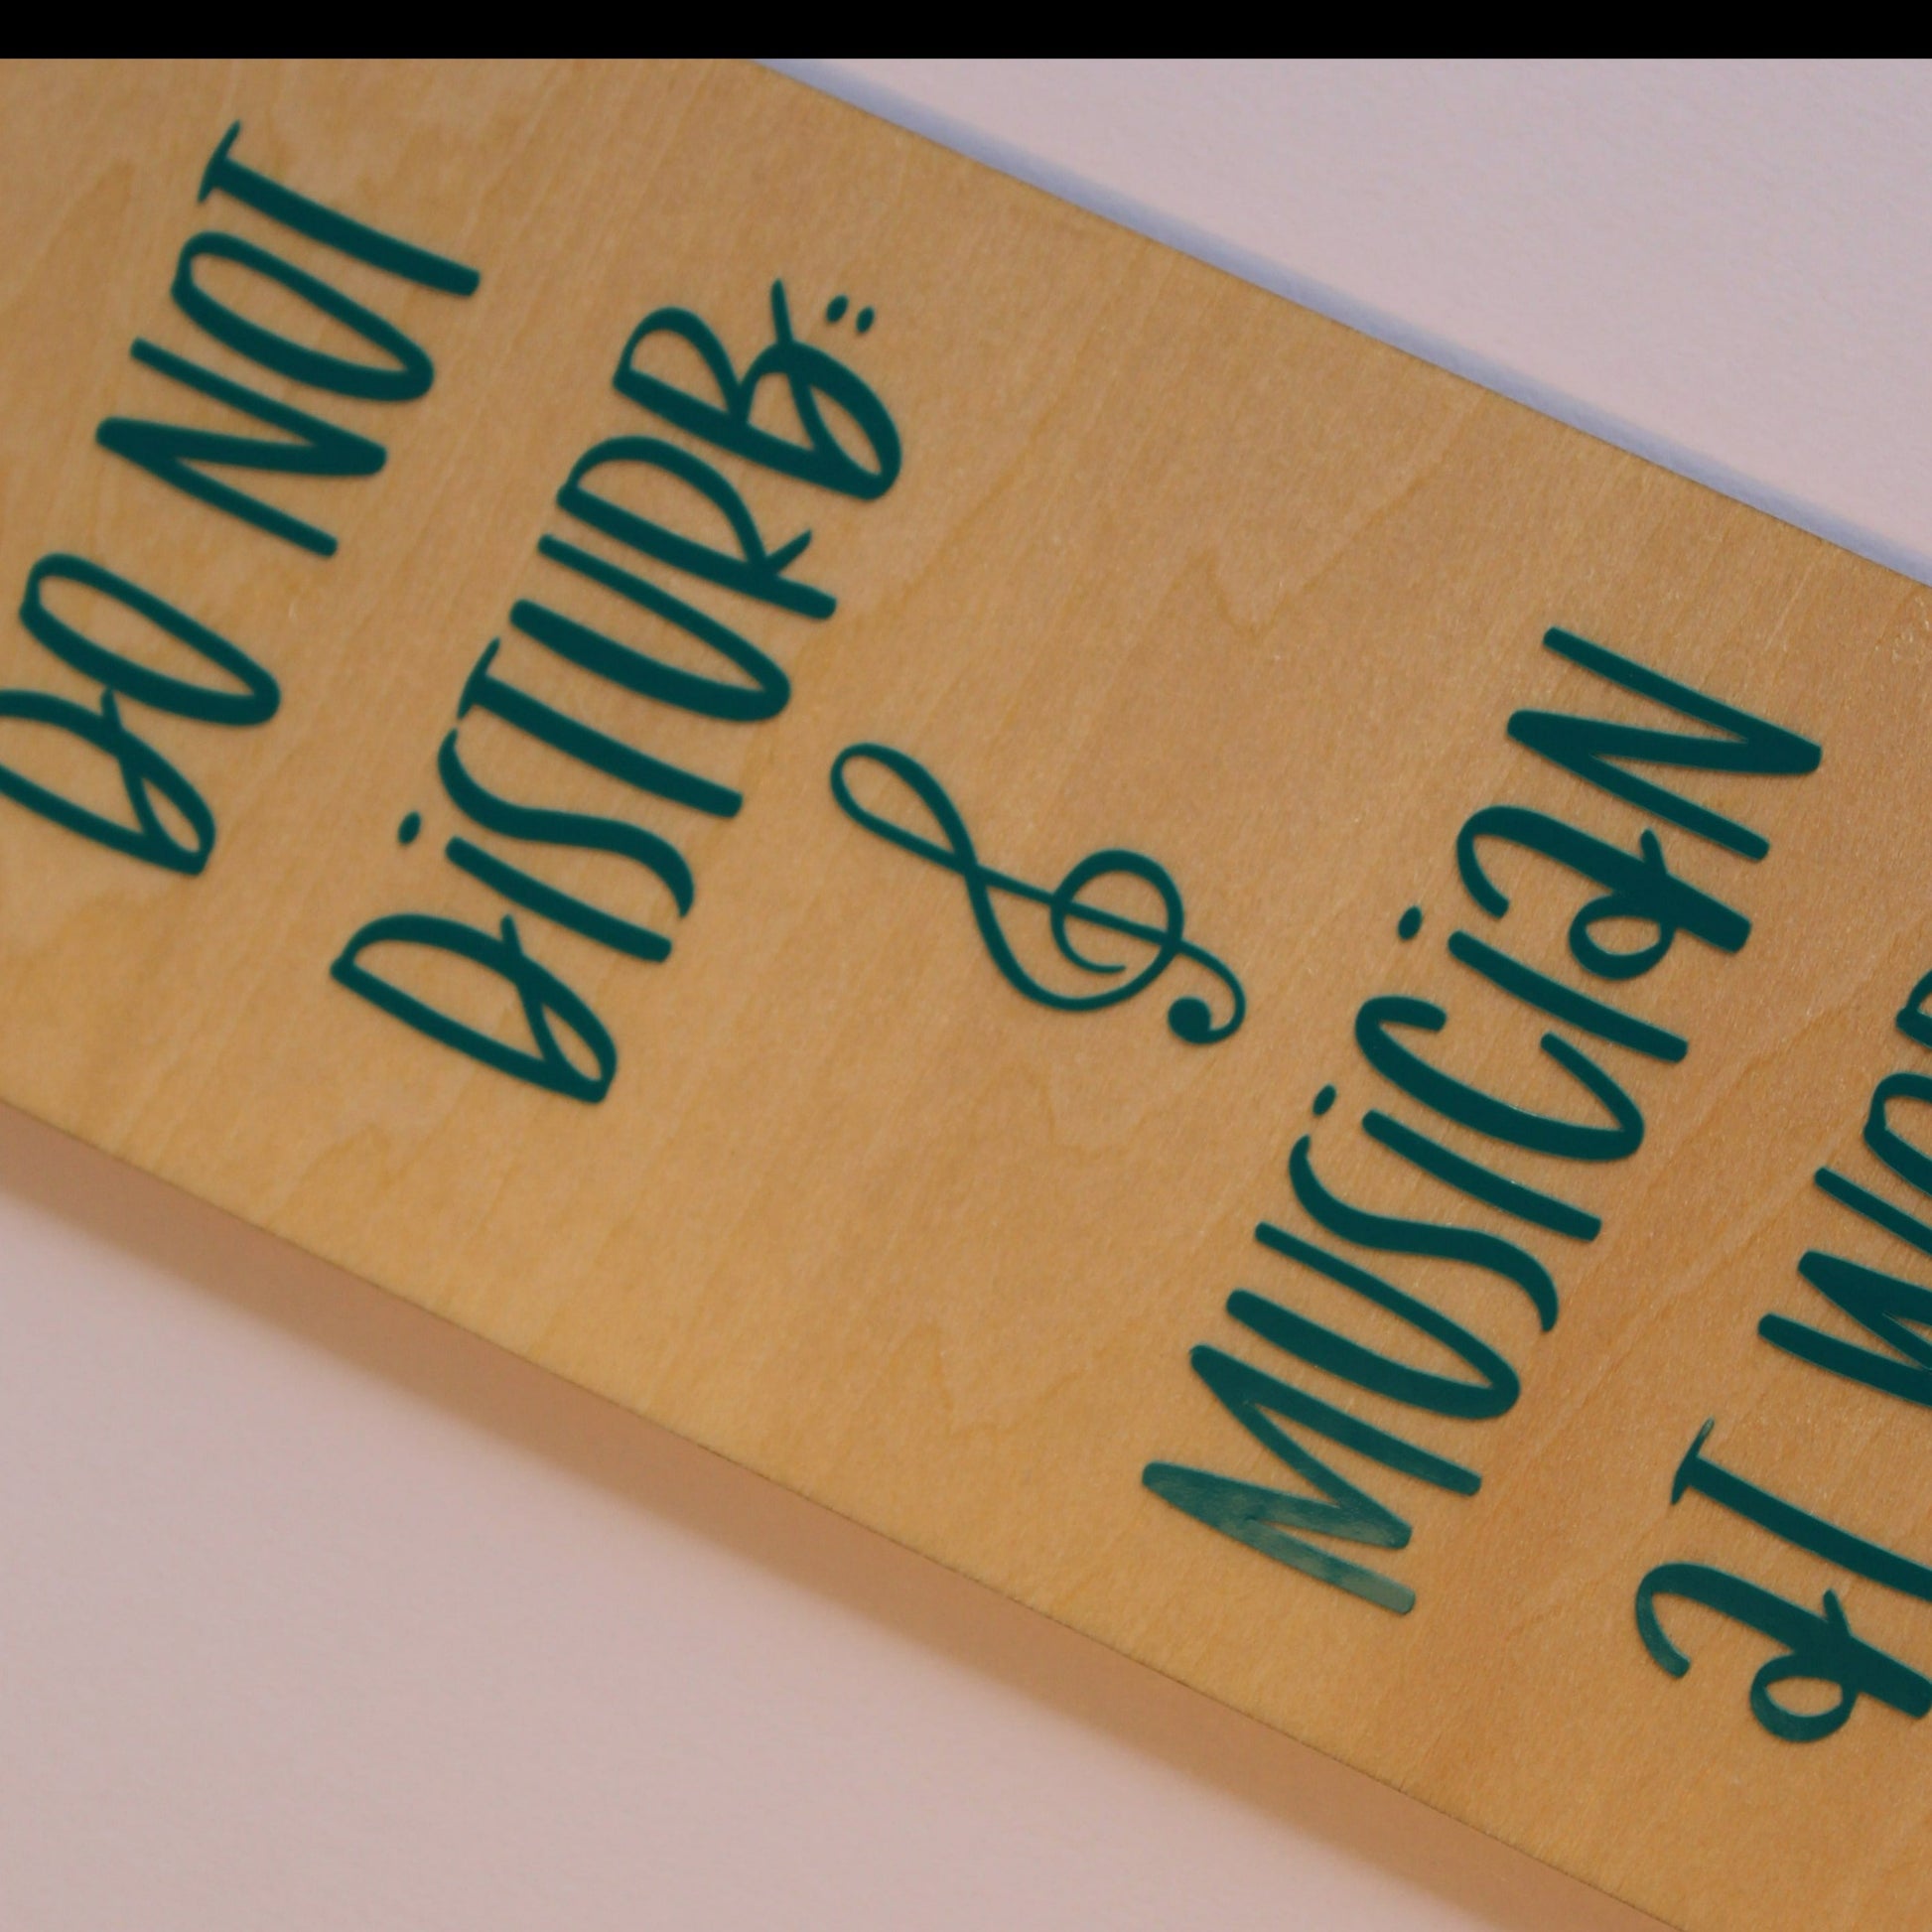 Close up of the teal text on the door hanger.